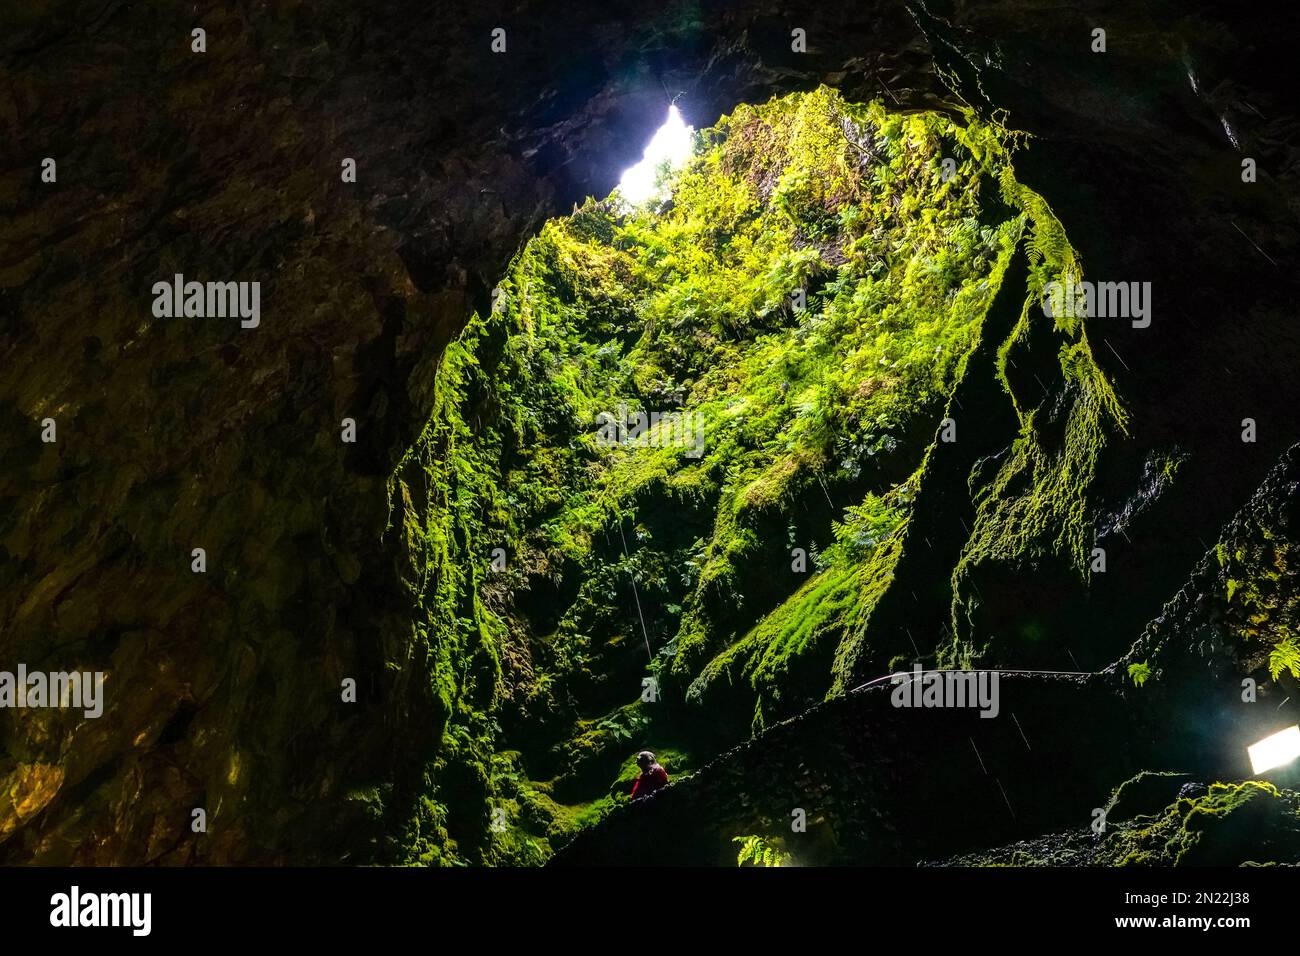 View looking up inside the Algar do Carvão a vertical lava tube dropping 300 feet from the surface accessible by a narrow staircase to a clear water pool at the bottom in the central mountains, Terceira Island, Azores, Portugal. Stock Photo